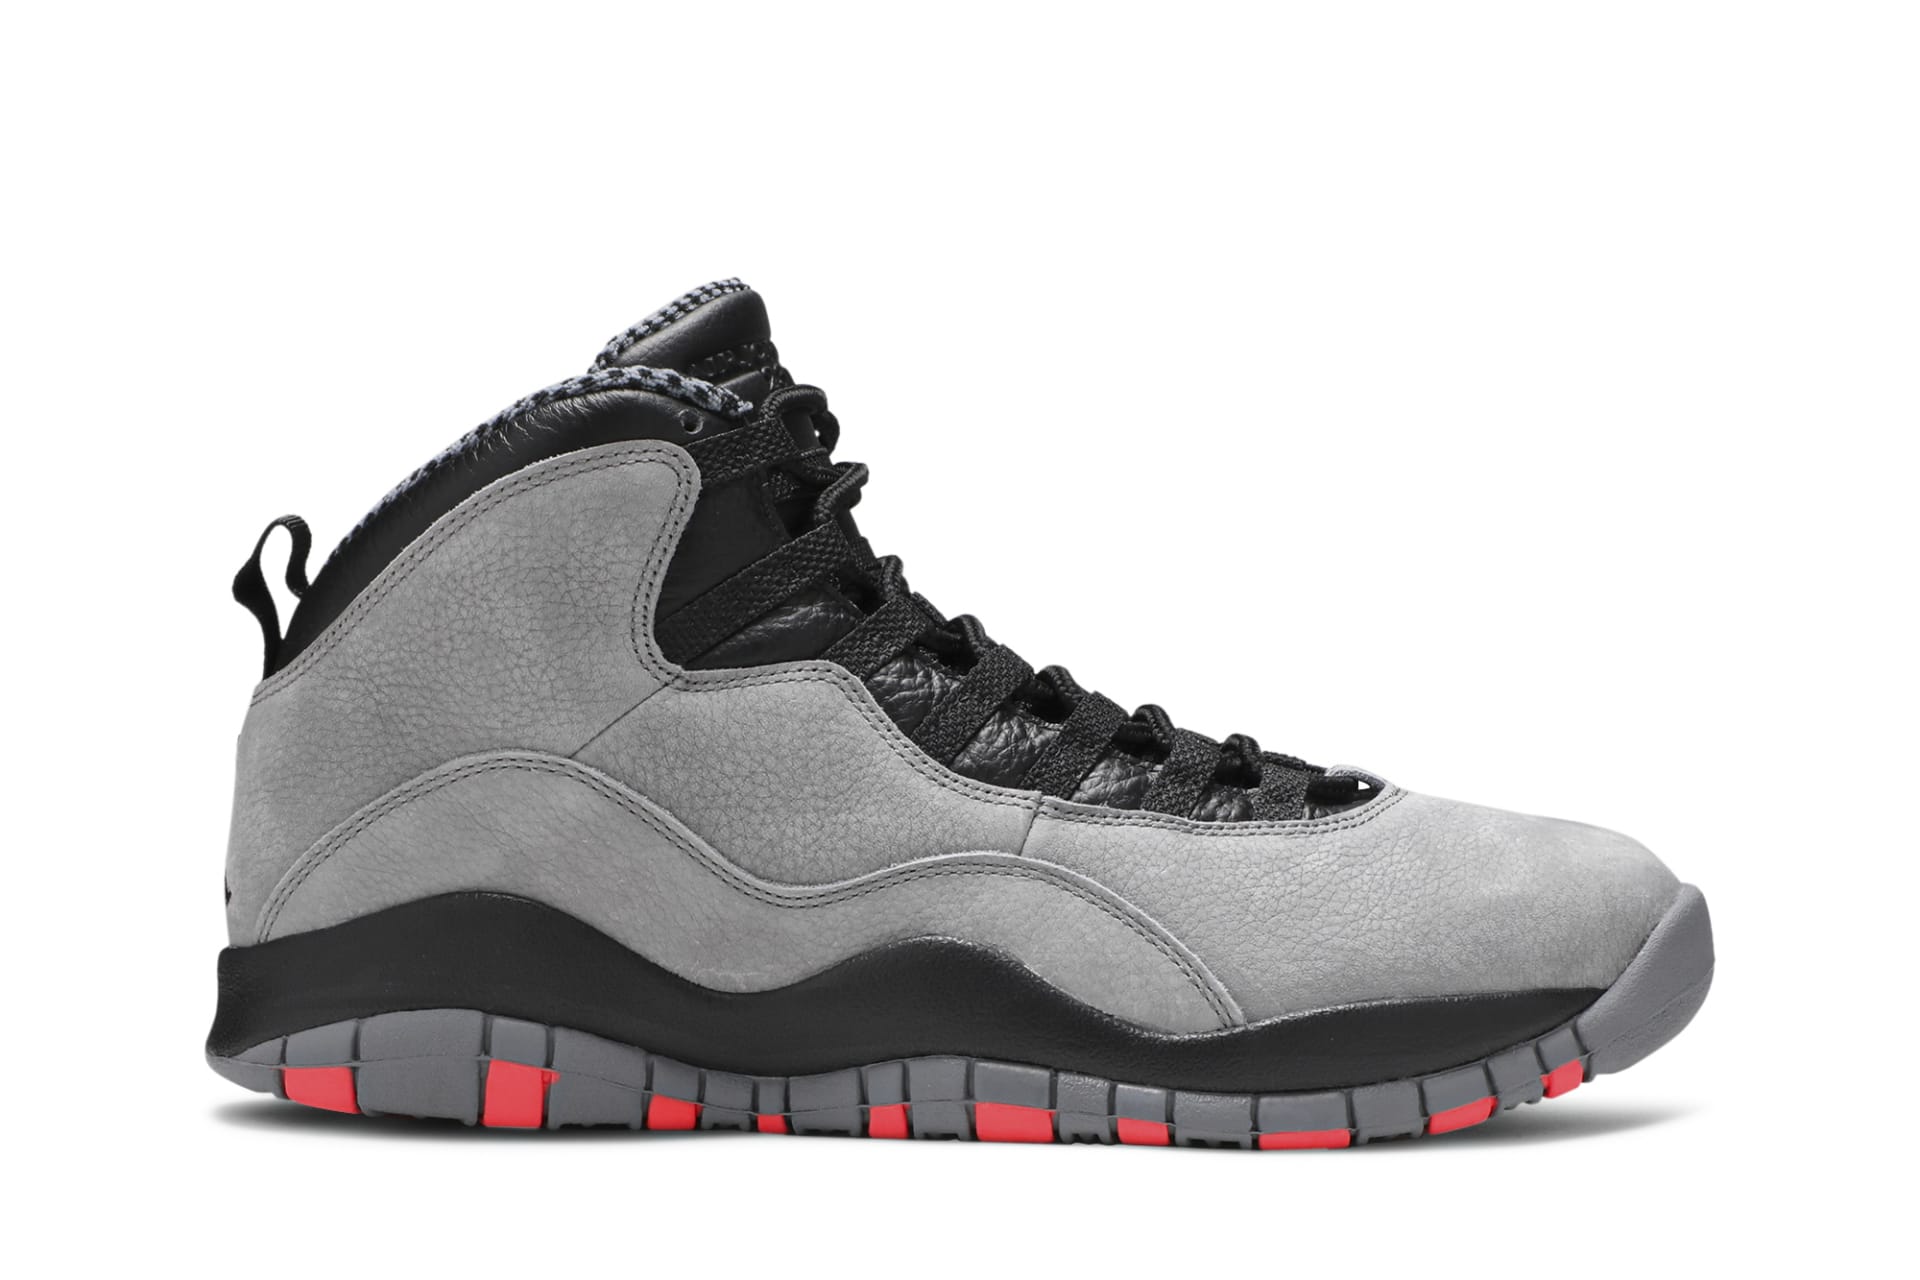 The and Coolest Grey Sneakers Right Now on GOAT Complex